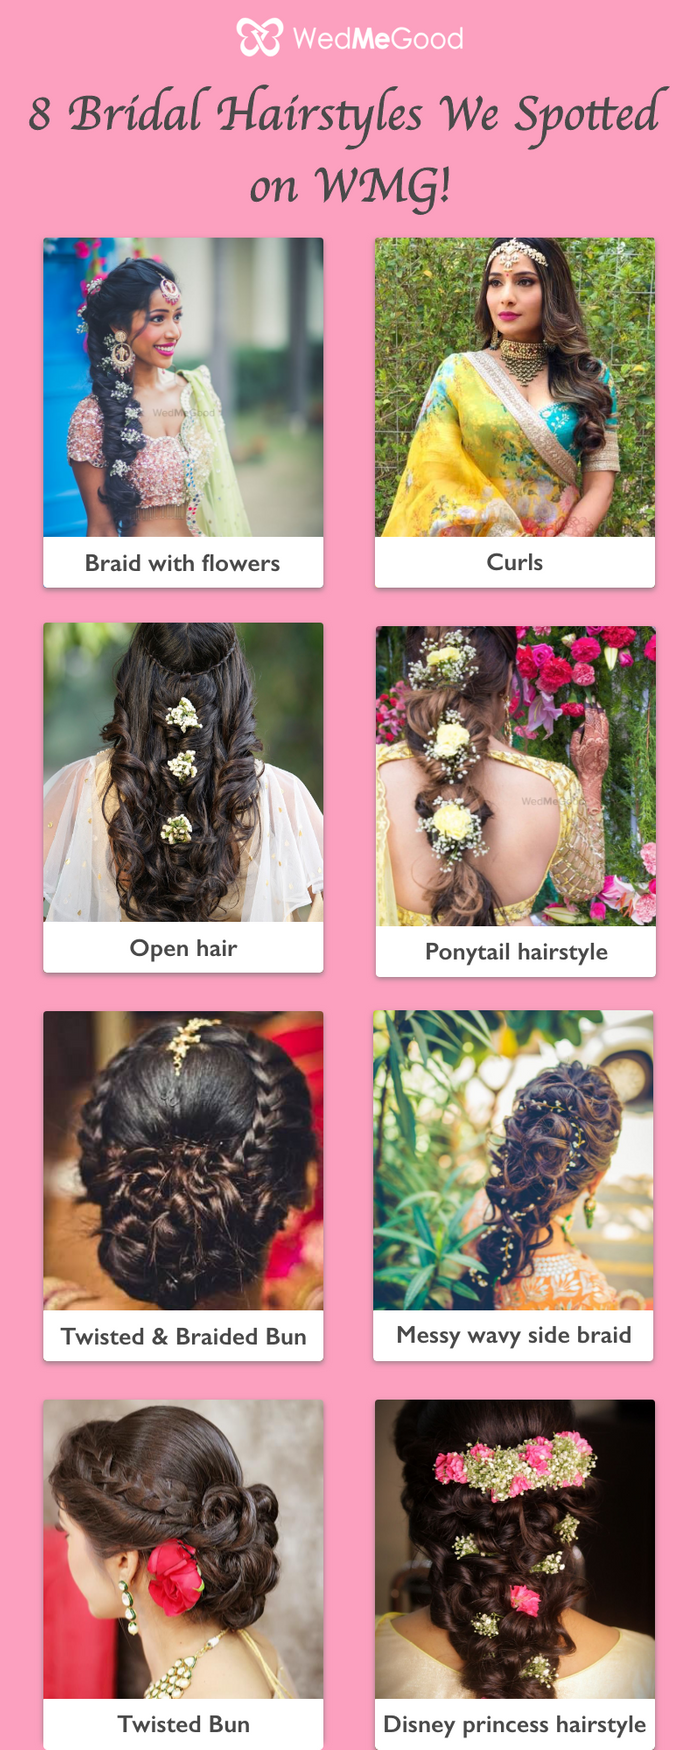 From Soft Curls To Disney Princess Hairstyle We Spotted These Pretty  Bridal Hairstyles on WMG  WedMeGood